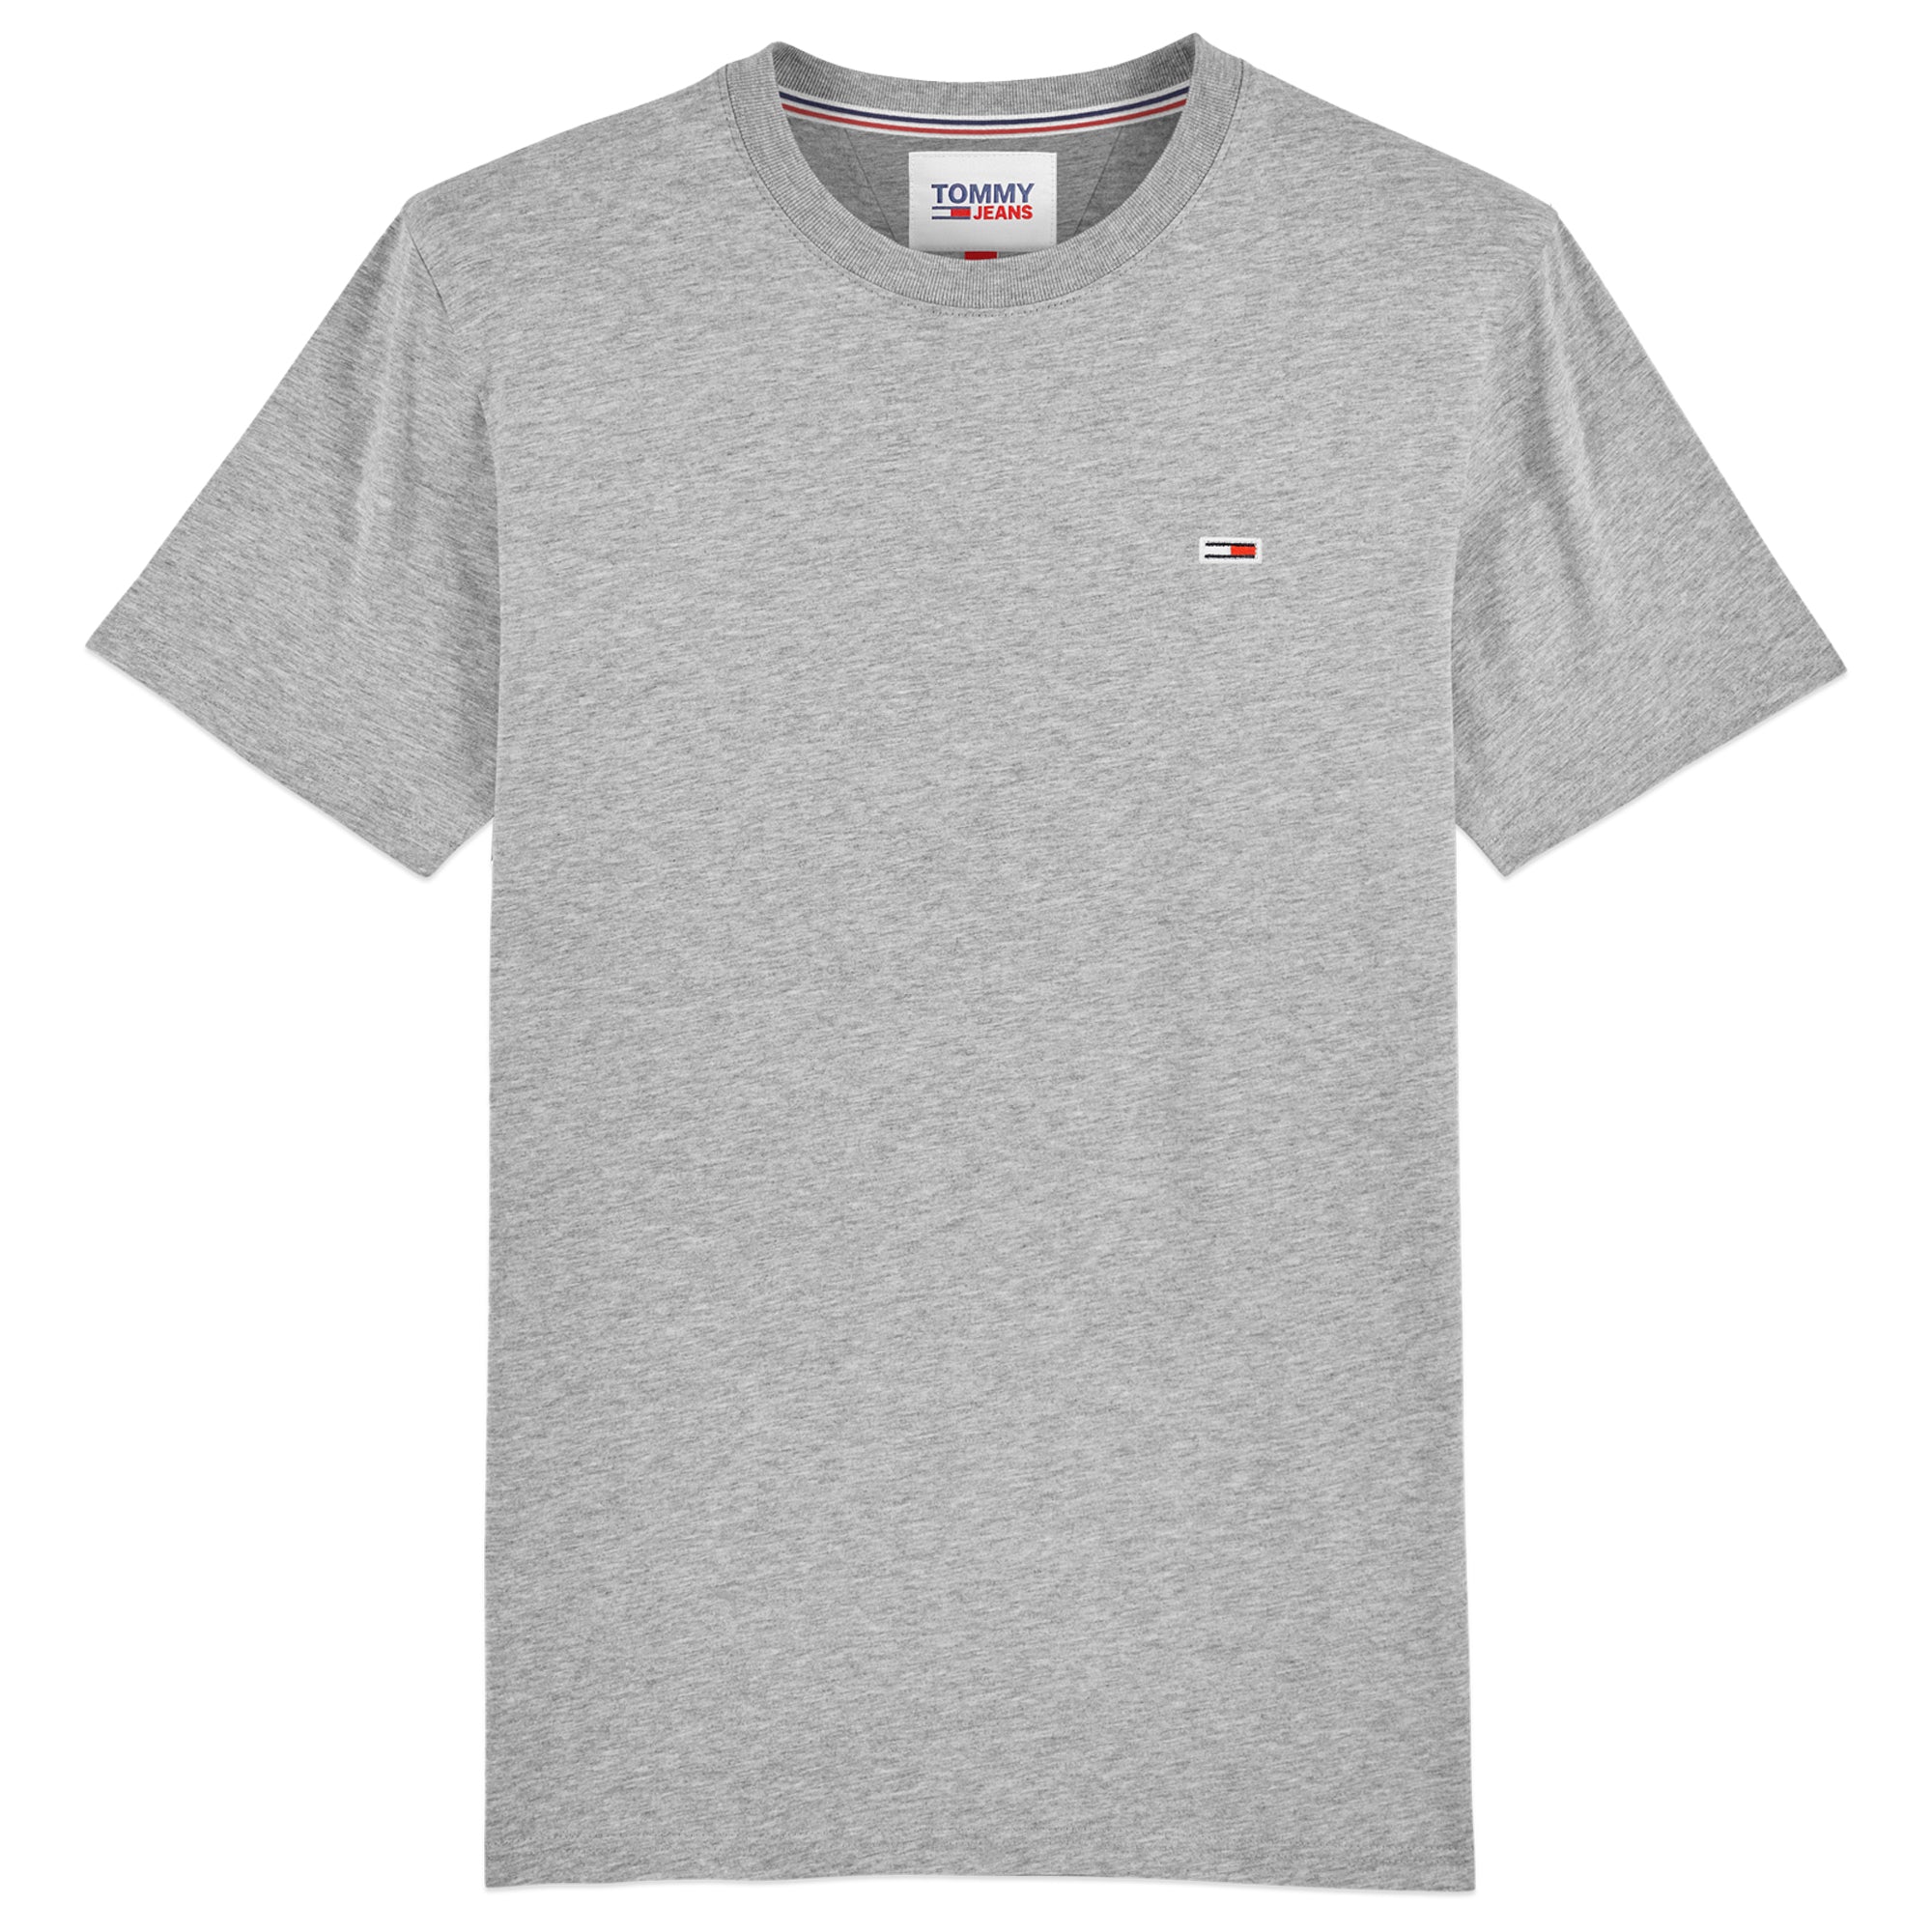 Tommy Jeans New Flag T-Shirt - Lt Grey Heather